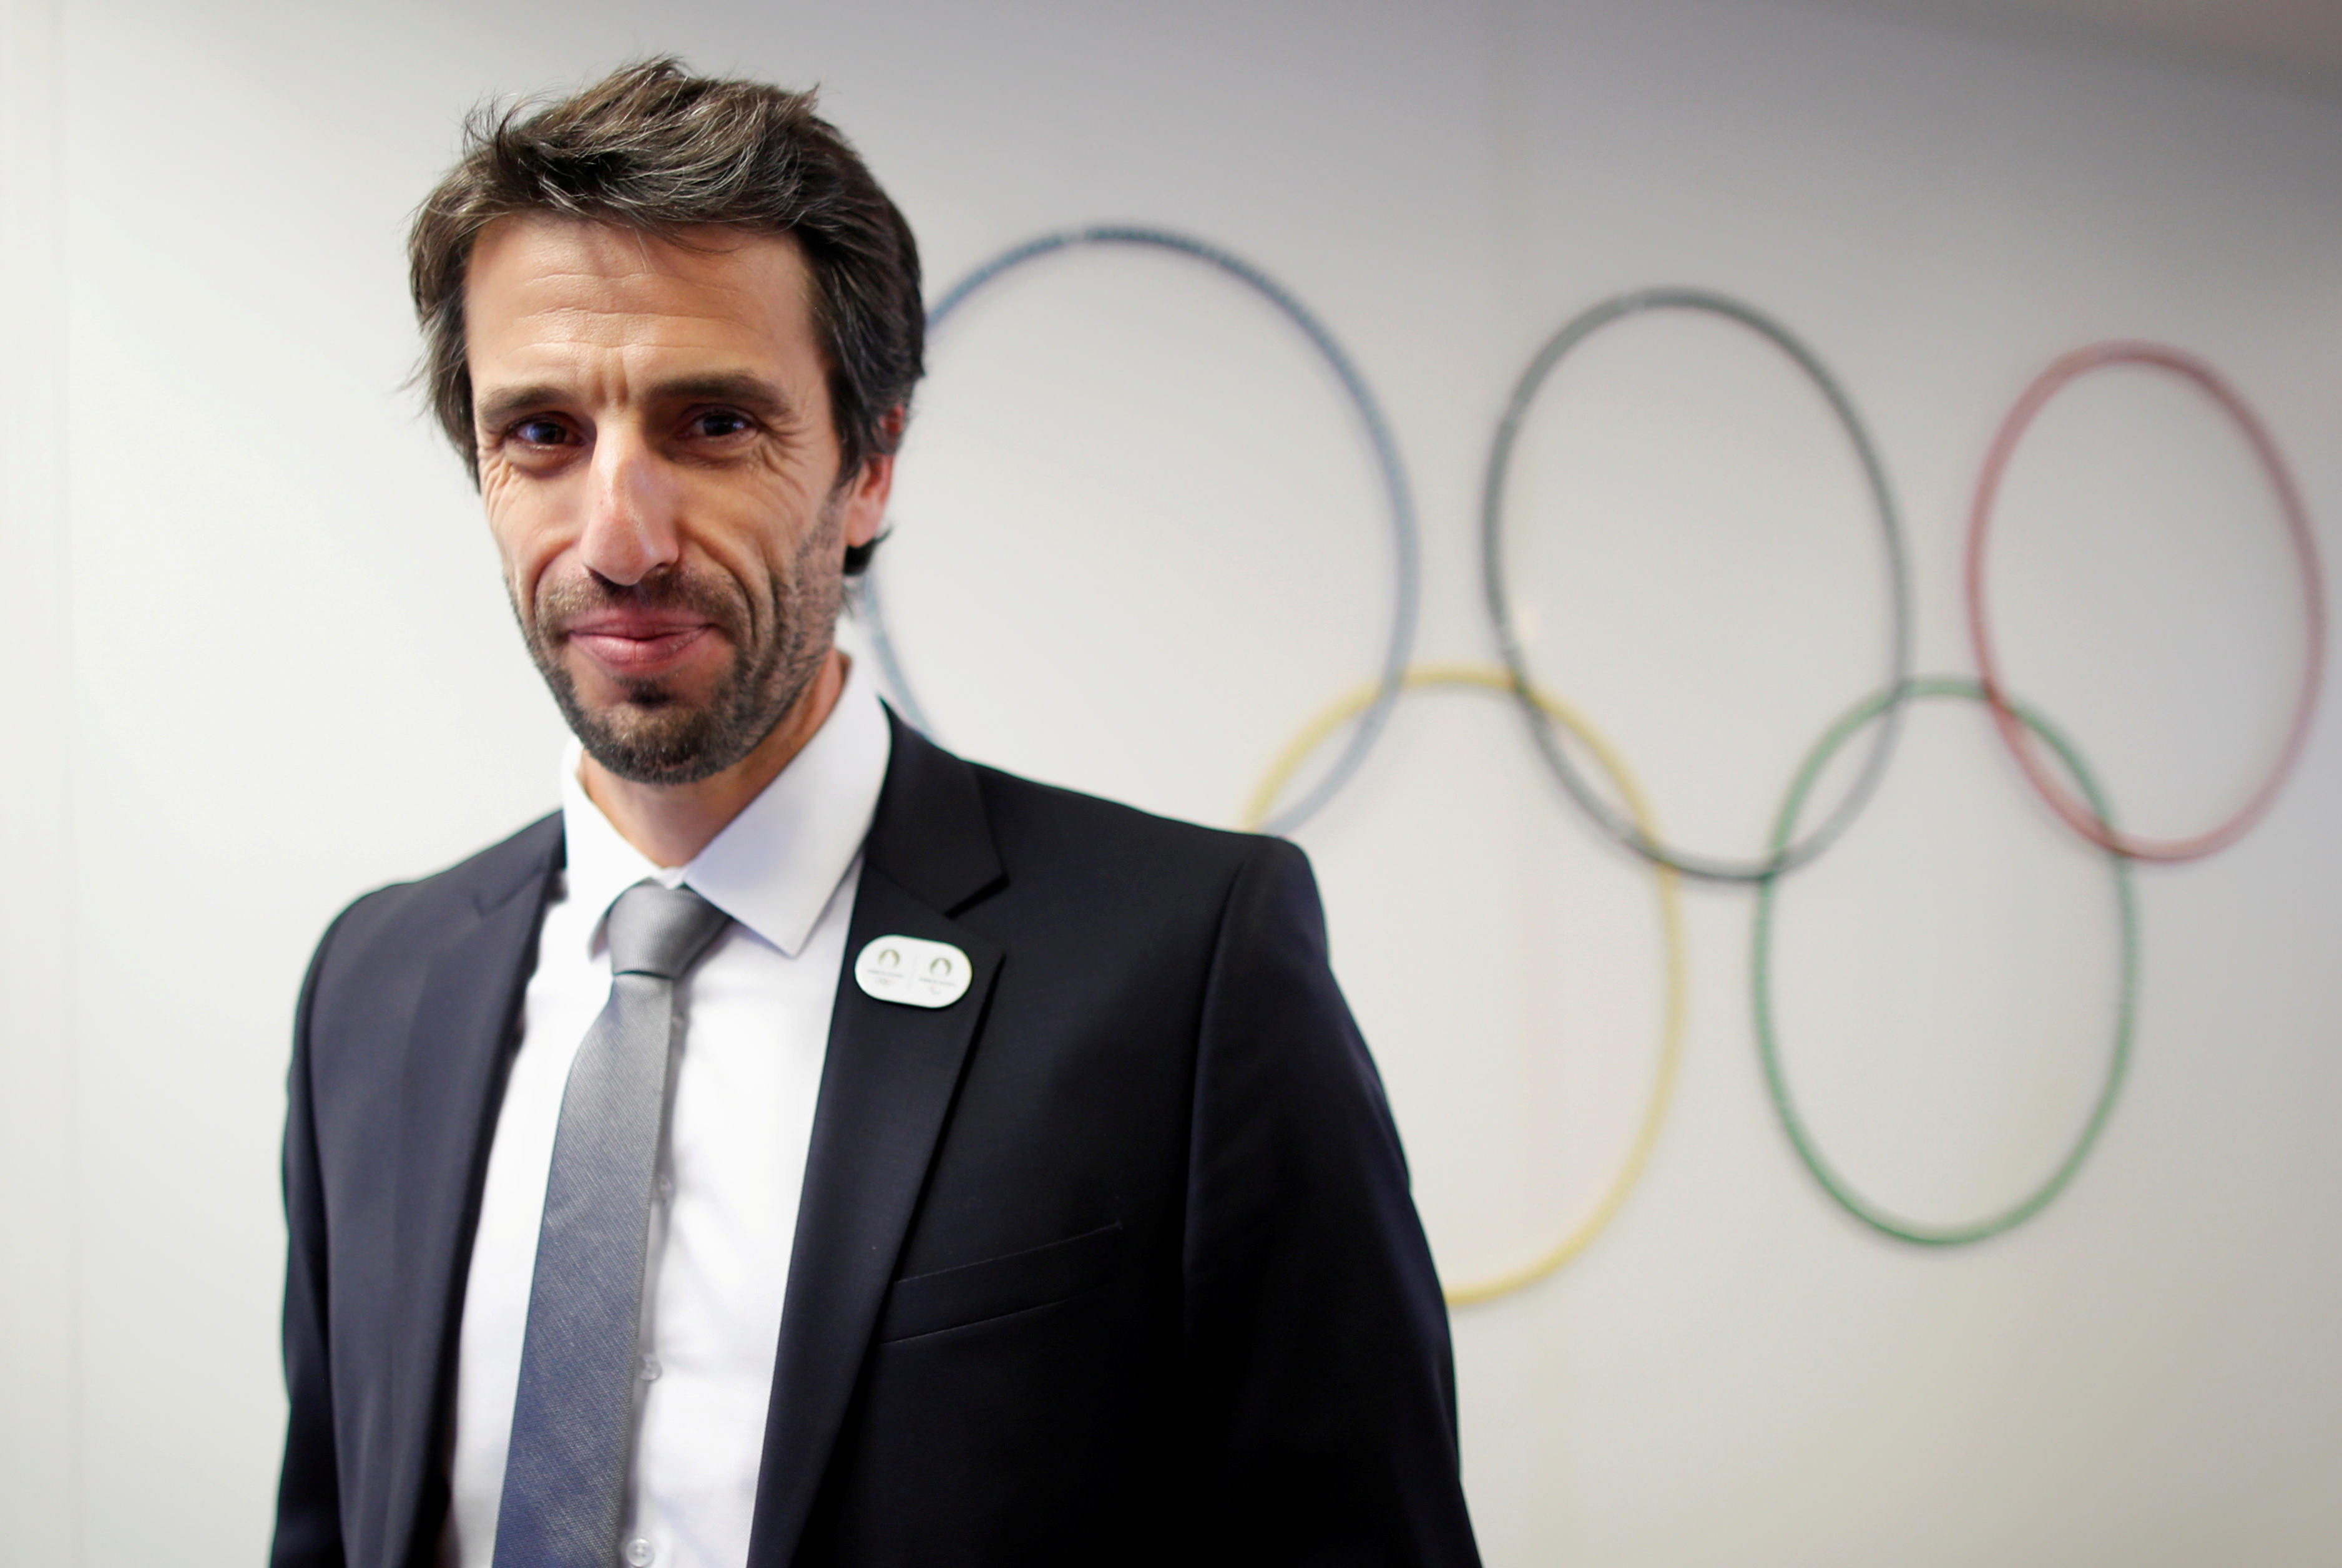 Tony Estanguet, leader of Paris 2024, catches Covid and cannot travel to the Beijing 2022 Games